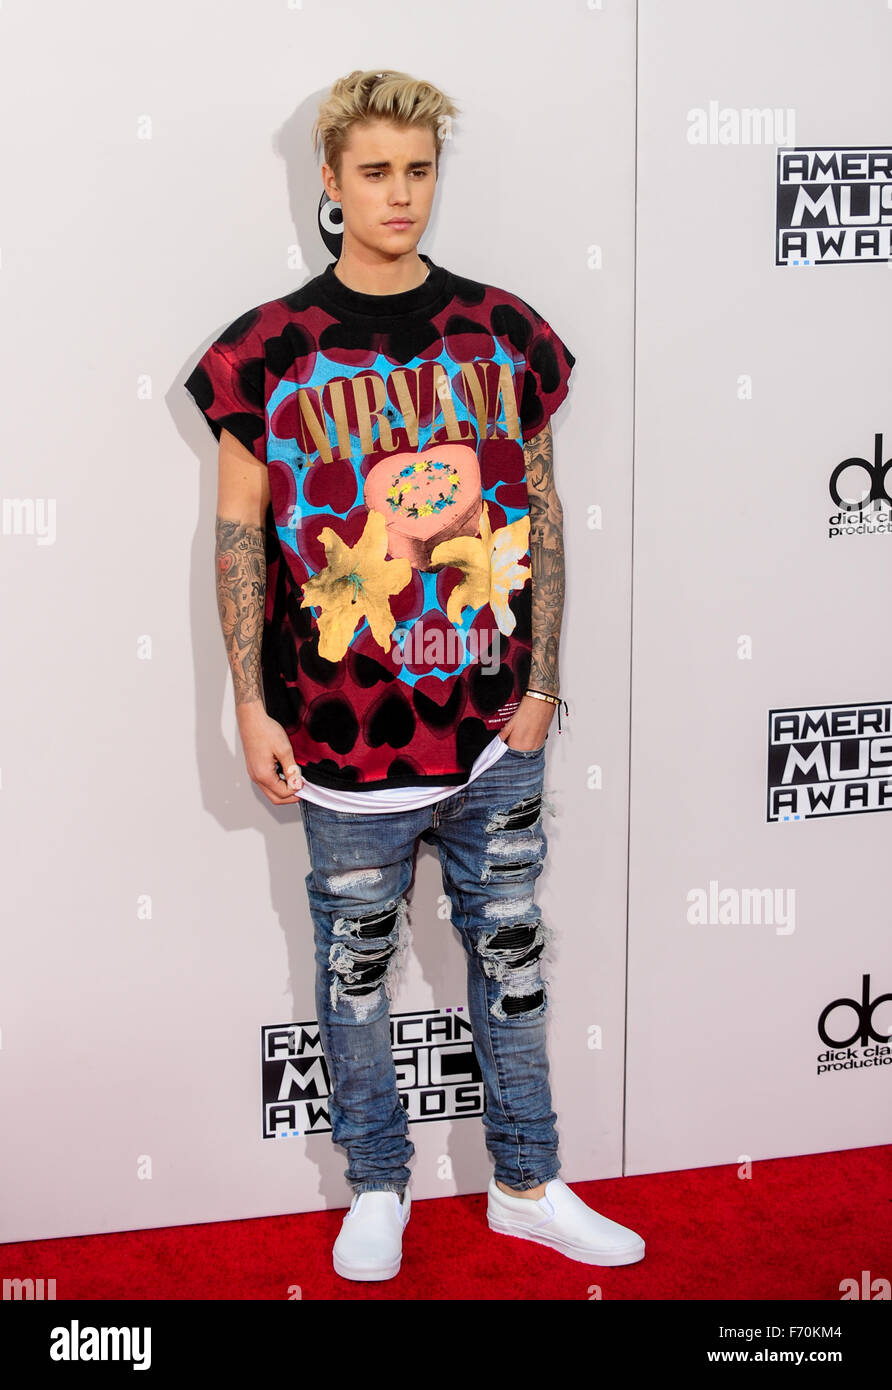 Los Angeles, USA. 22nd Nov, 2015. Singer Justin Bieber attends the 2015 American Music Awards at Microsoft Theater in Los Angeles, California, the United States, Nov. 22, 2015. Credit:  Zhang Chaoqun/Xinhua/Alamy Live News Stock Photo